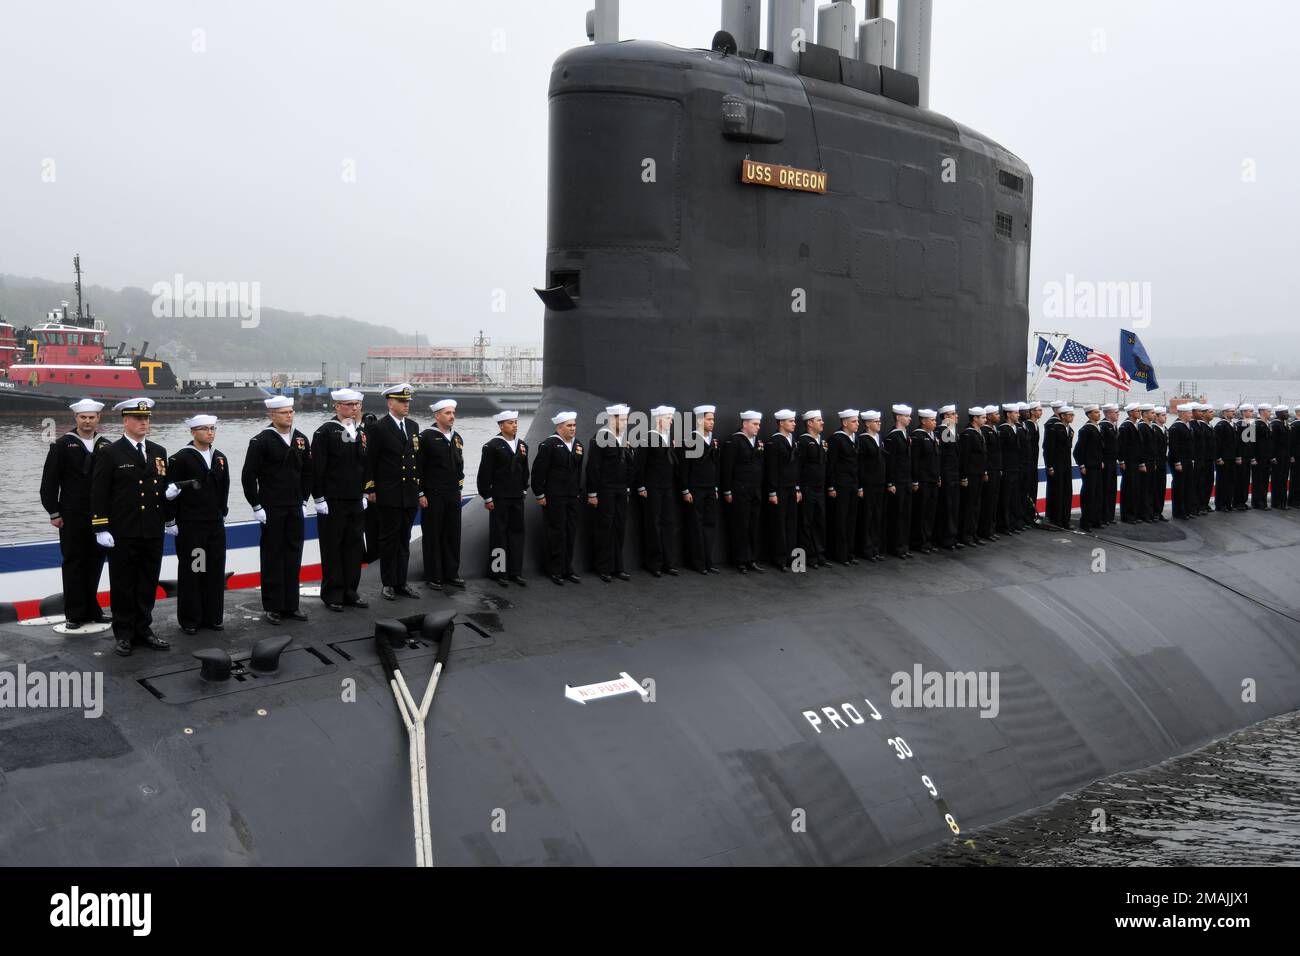 220528-N-GR655-0202 GROTON, Connecticut (May 28, 2022) – Crewmembers attached to the Virginia-class fast attack submarine USS Oregon (SSN 793) man the ship during a commissioning ceremony in Groton, Conn., May 28, 2022. SSN 793, the third U.S Navy ship launched with the name Oregon and first in more than a century, is a flexible, multi-mission platform designed to carry out the seven core competencies of the submarine force: anti-submarine warfare; anti-surface warfare; delivery of special operations forces; strike warfare; irregular warfare; intelligence, surveillance and reconnaissance; and Stock Photo